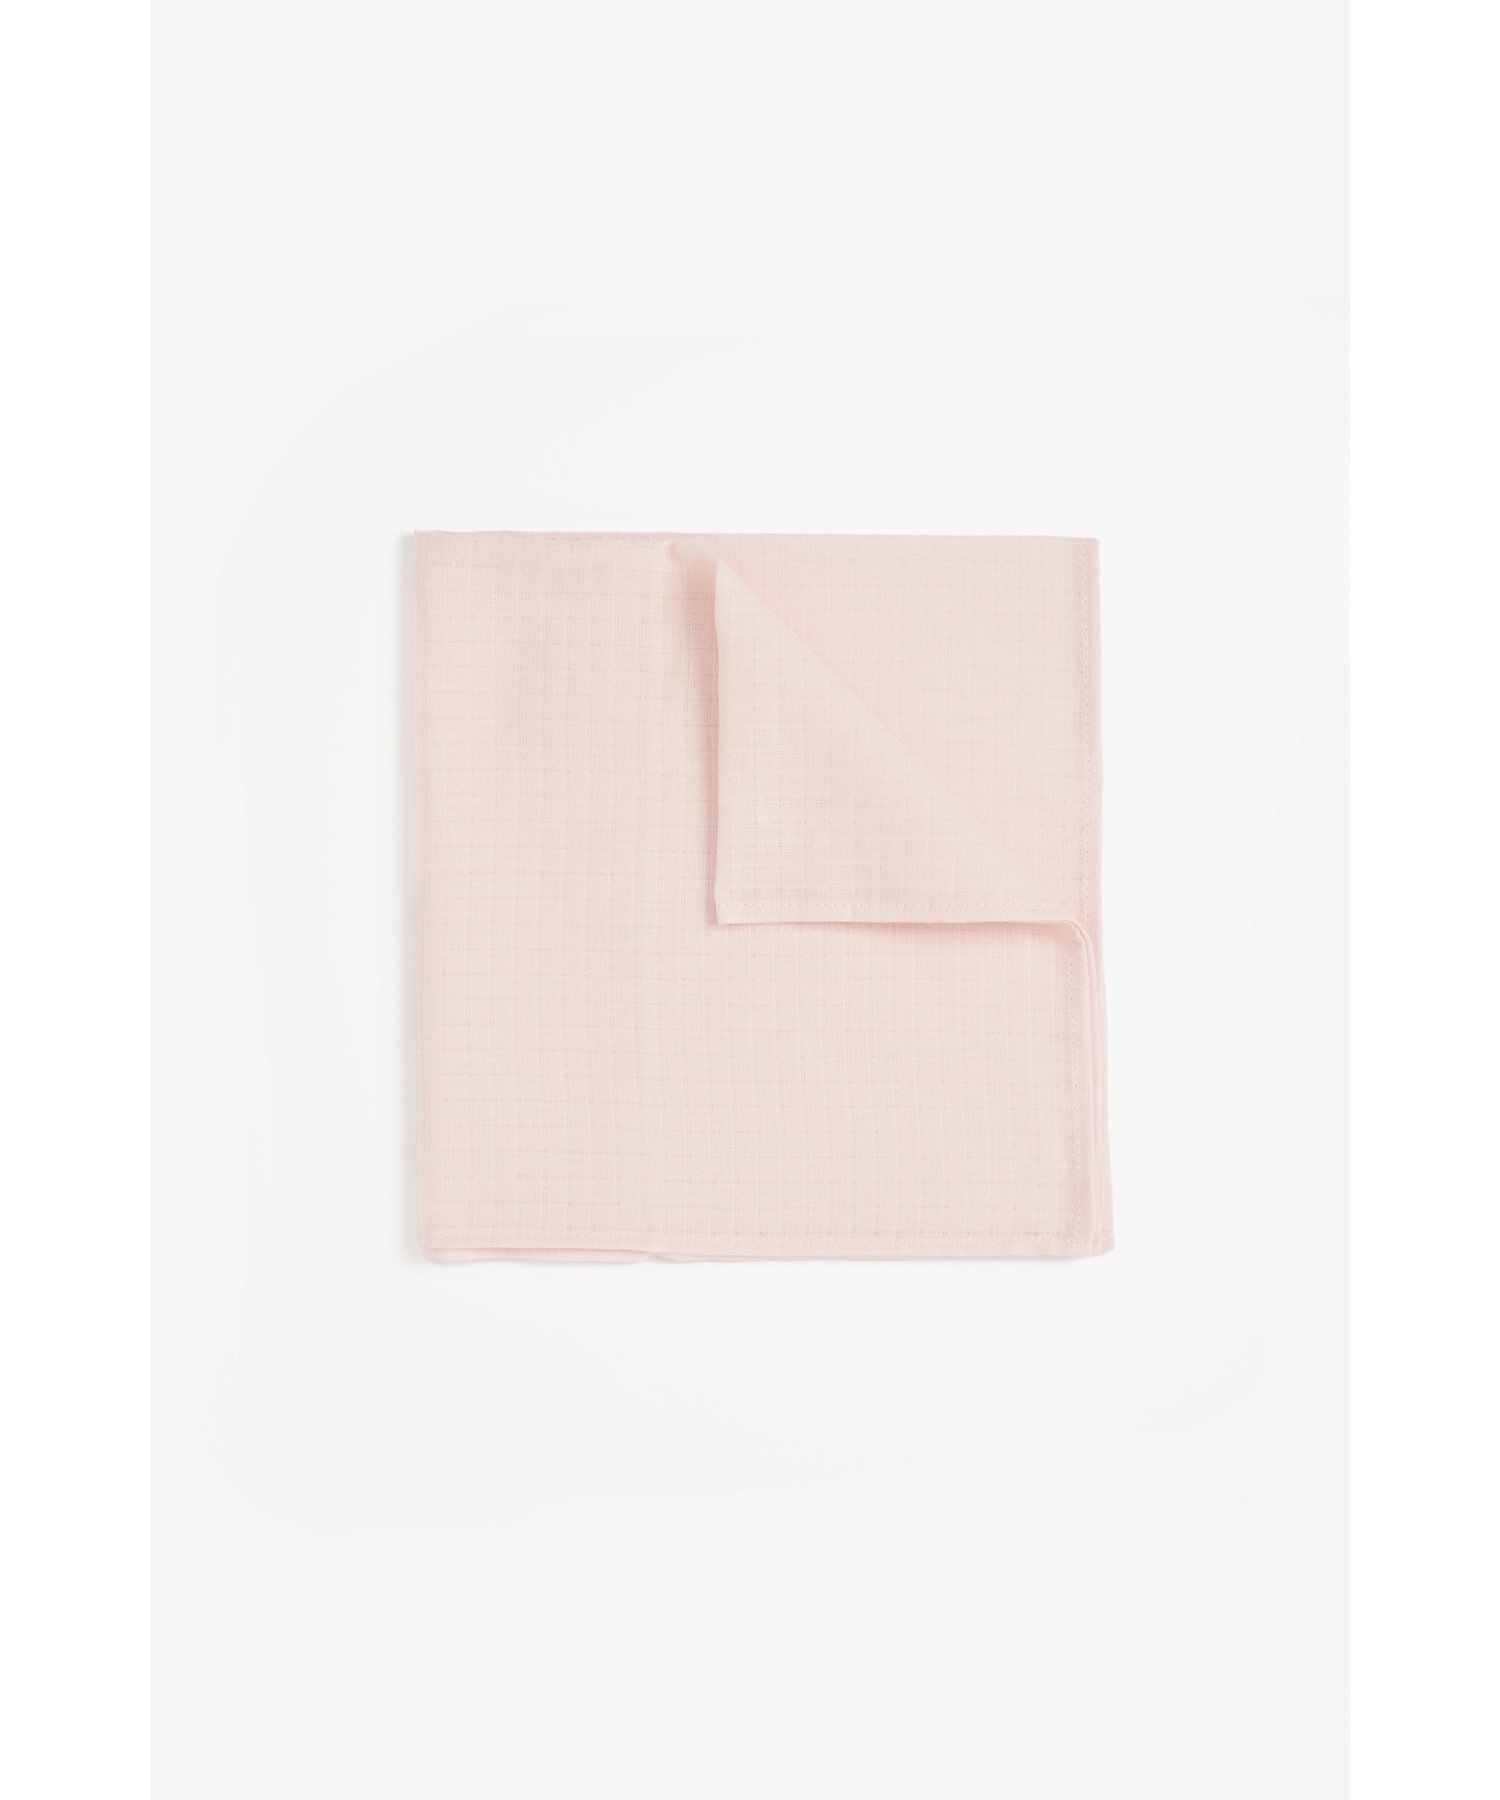 Mothercare | Mothercare Essential Muslins Pink Pack of 6 1